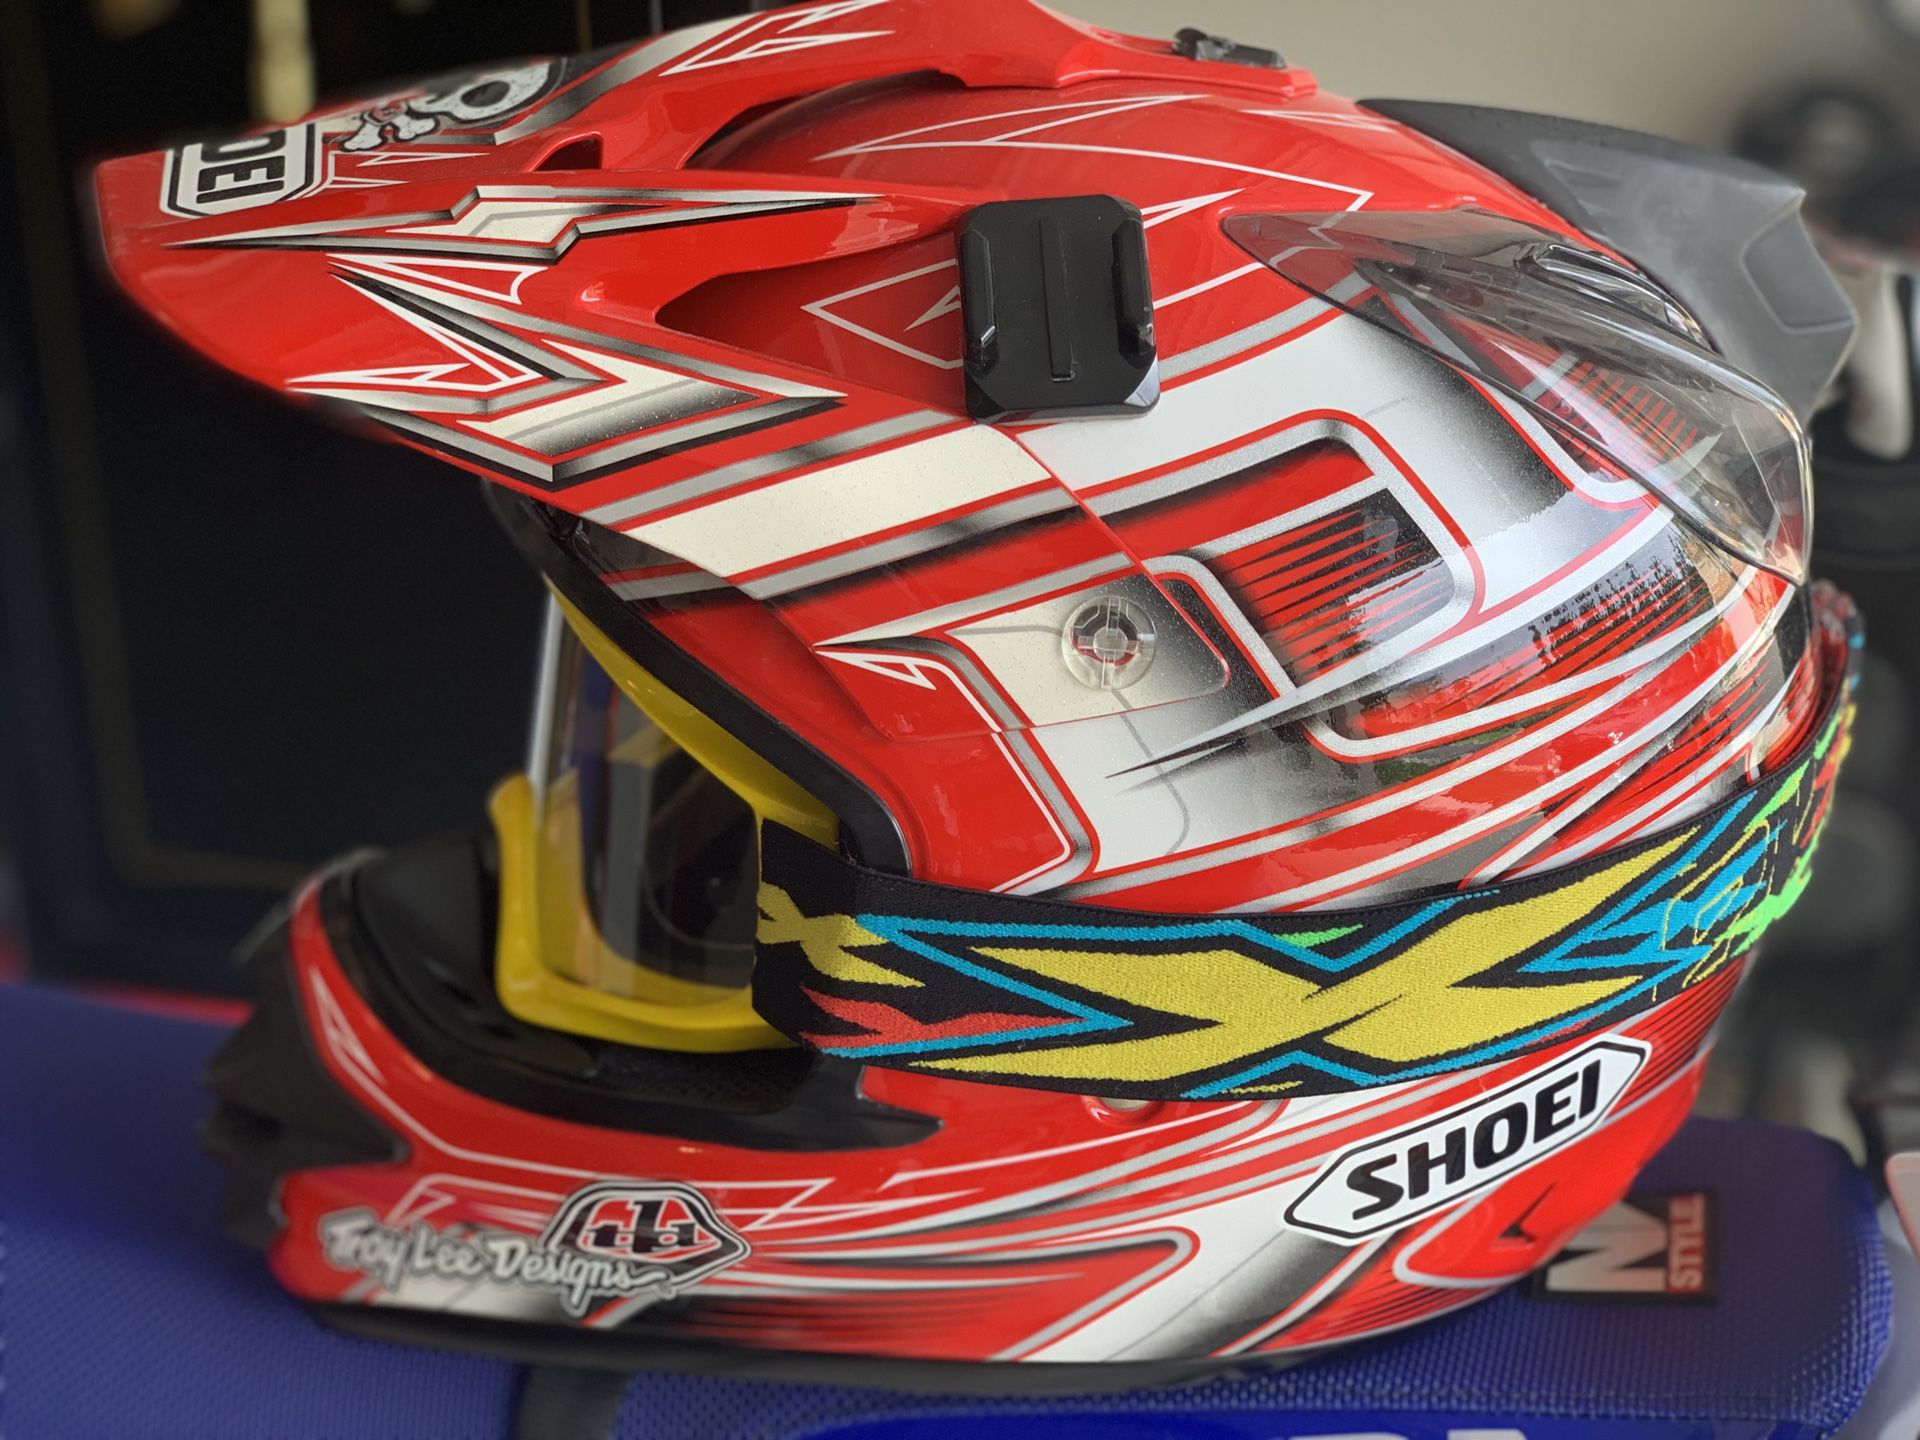 SHOEI Helmet size Large with new Air Helmet Interior Lining and free goggles. Motorcycle, motocross, enduro, dual sport